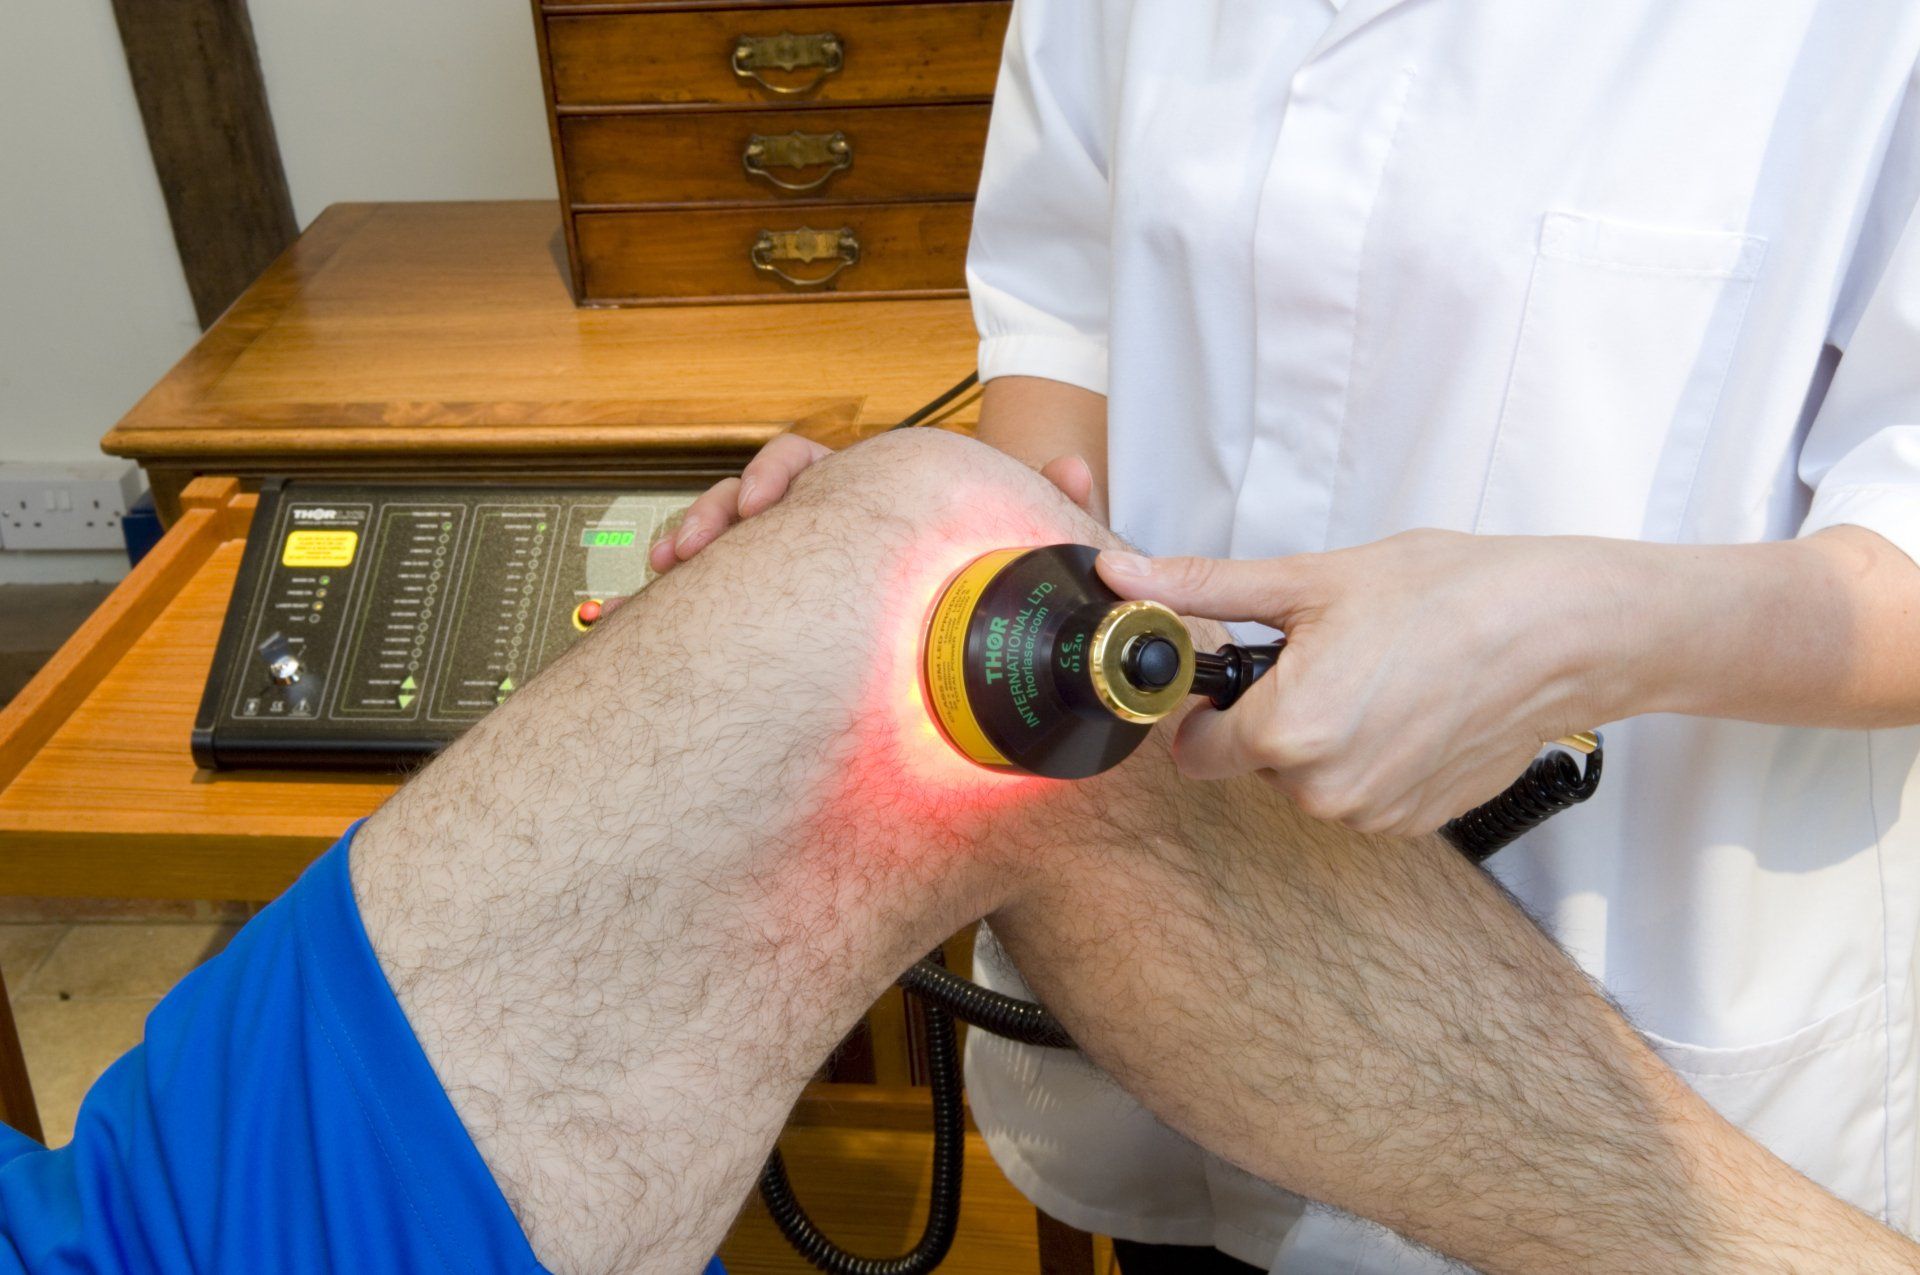 Man getting laser treatment on his knee